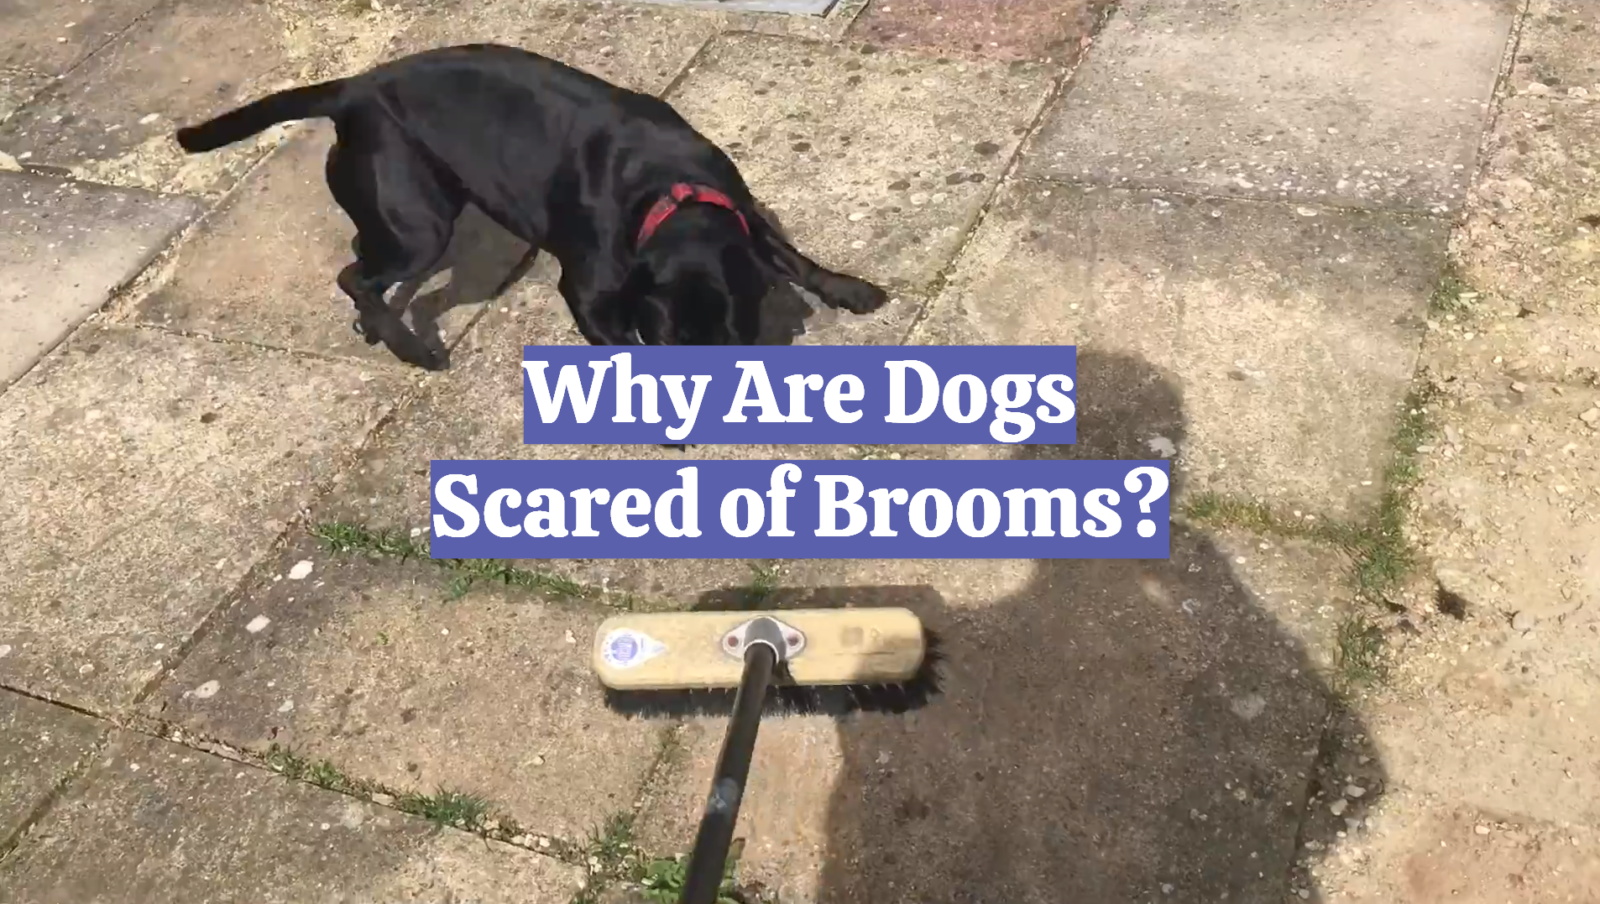 Why Are Dogs Scared of Brooms?